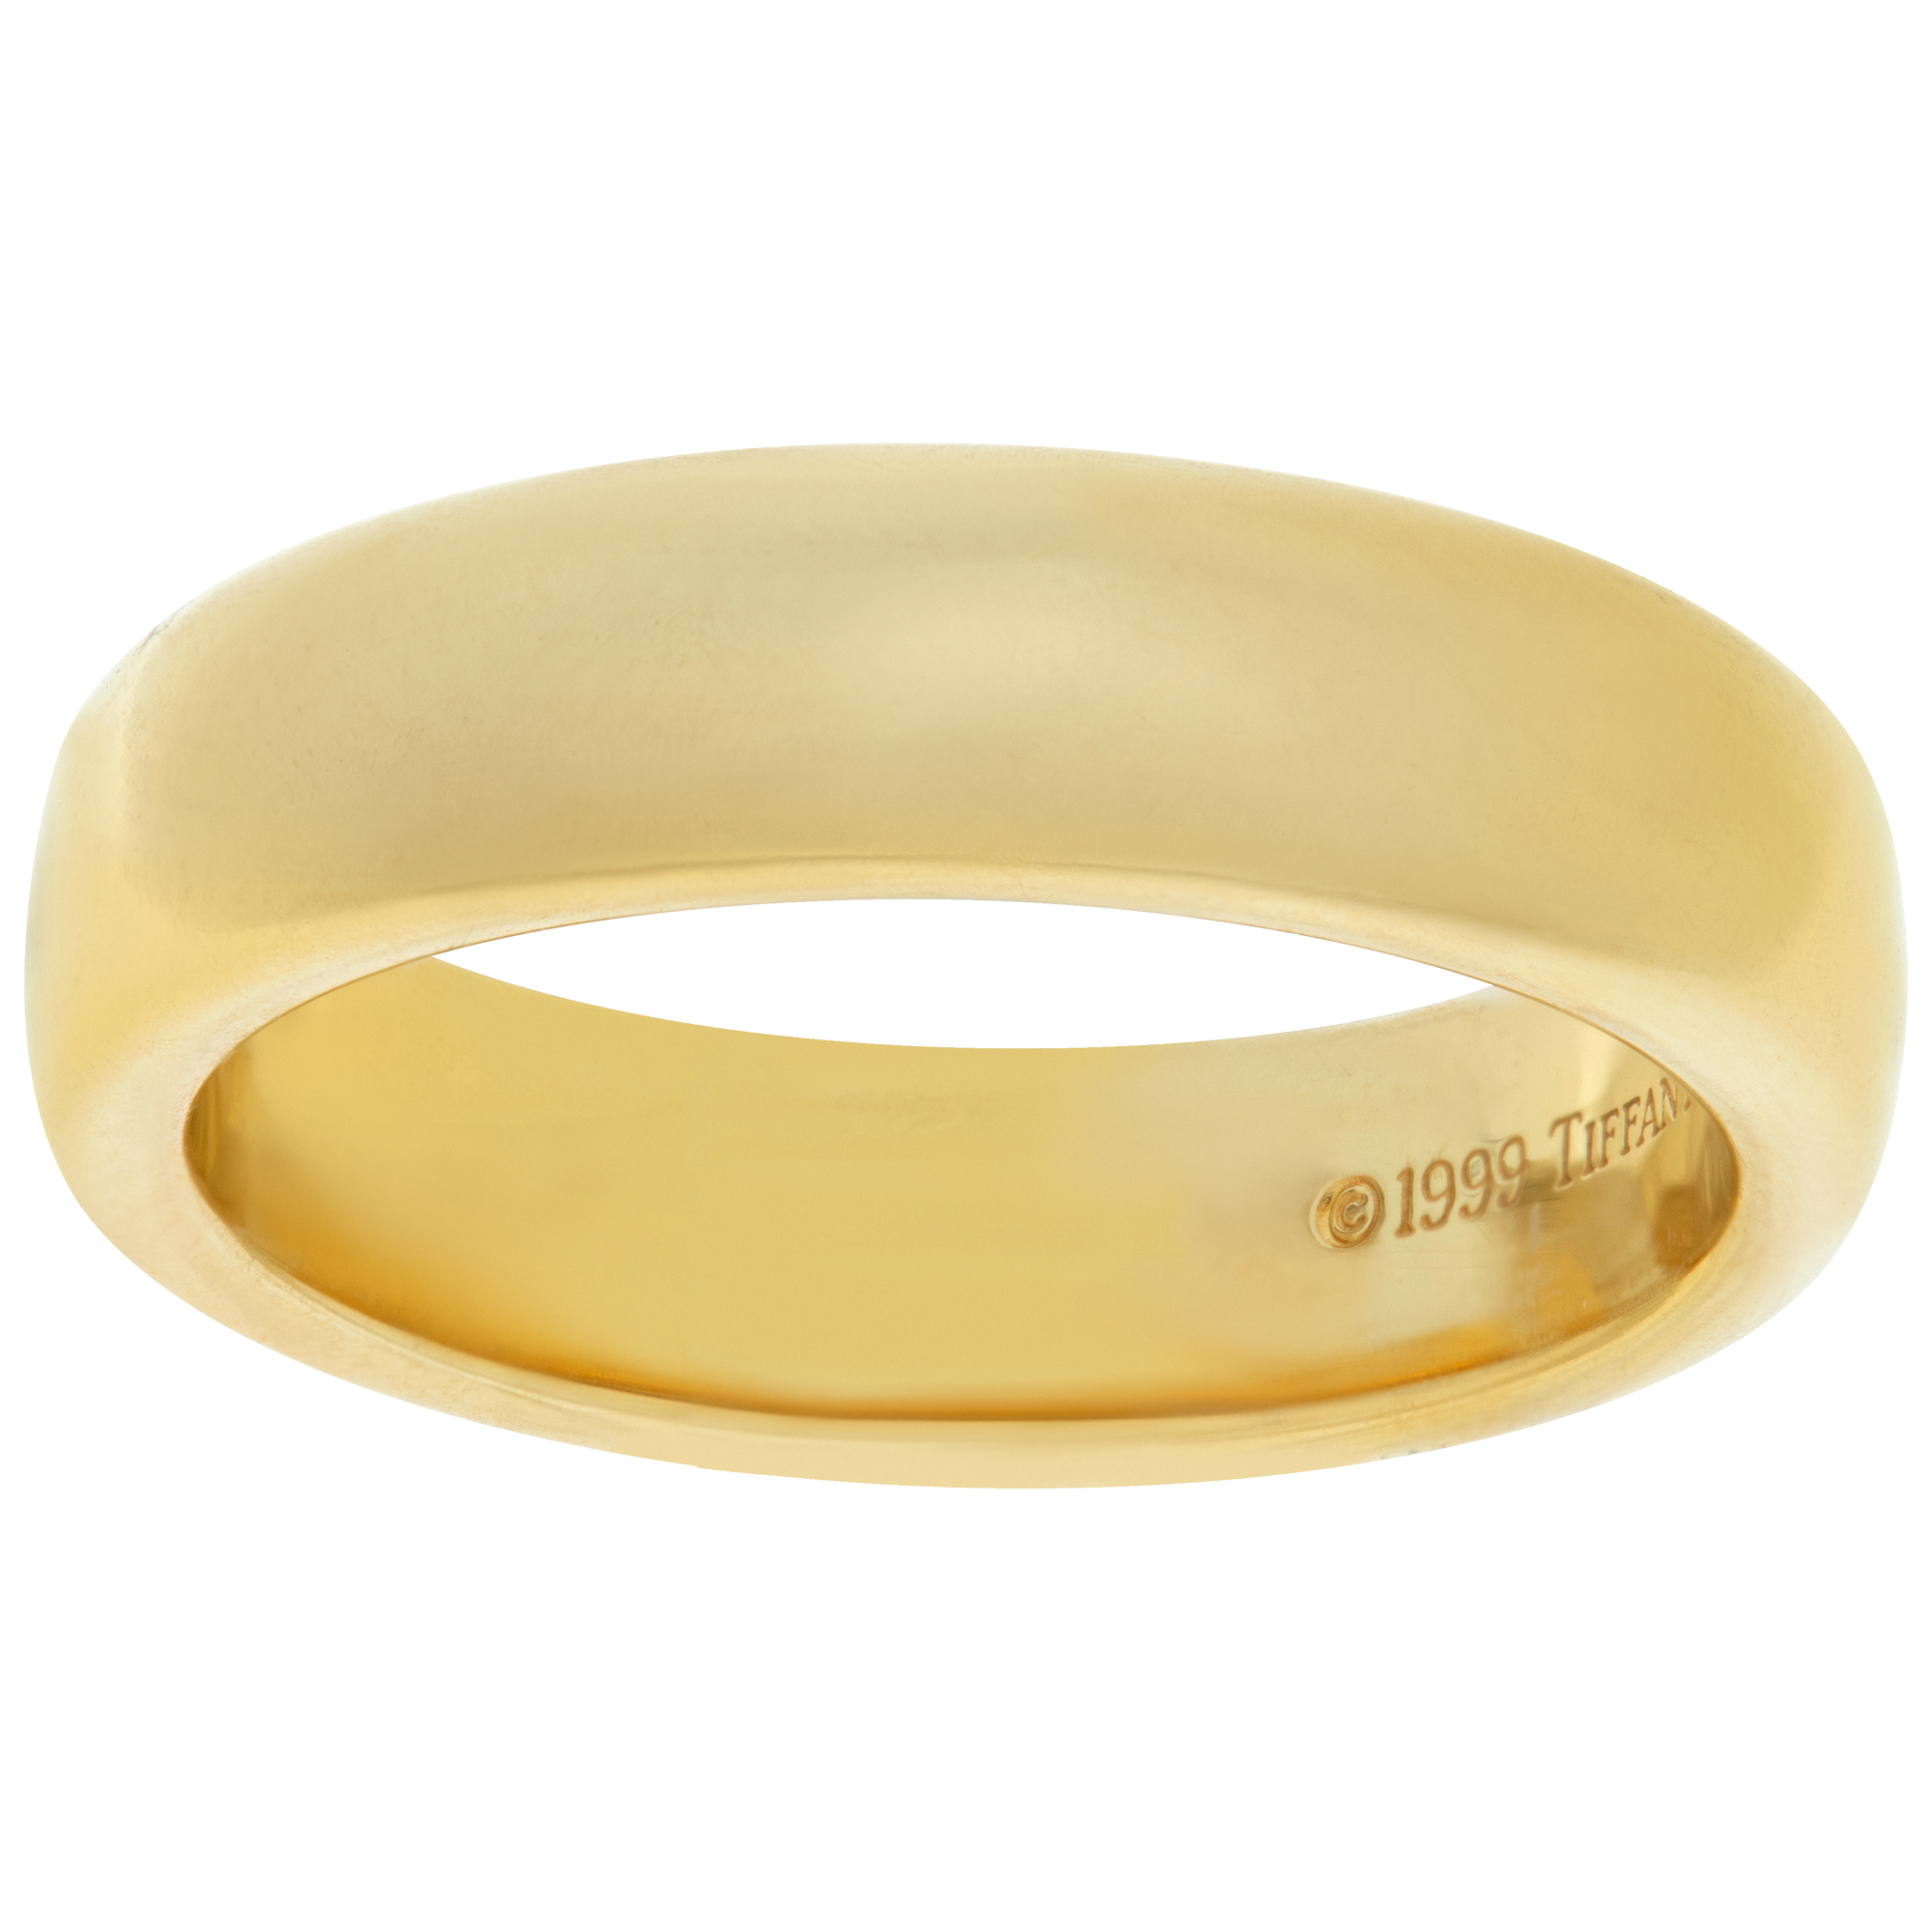 Tiffany & Co. Classic wedding band in 18k yellow gold, 4.5mm wide image 1